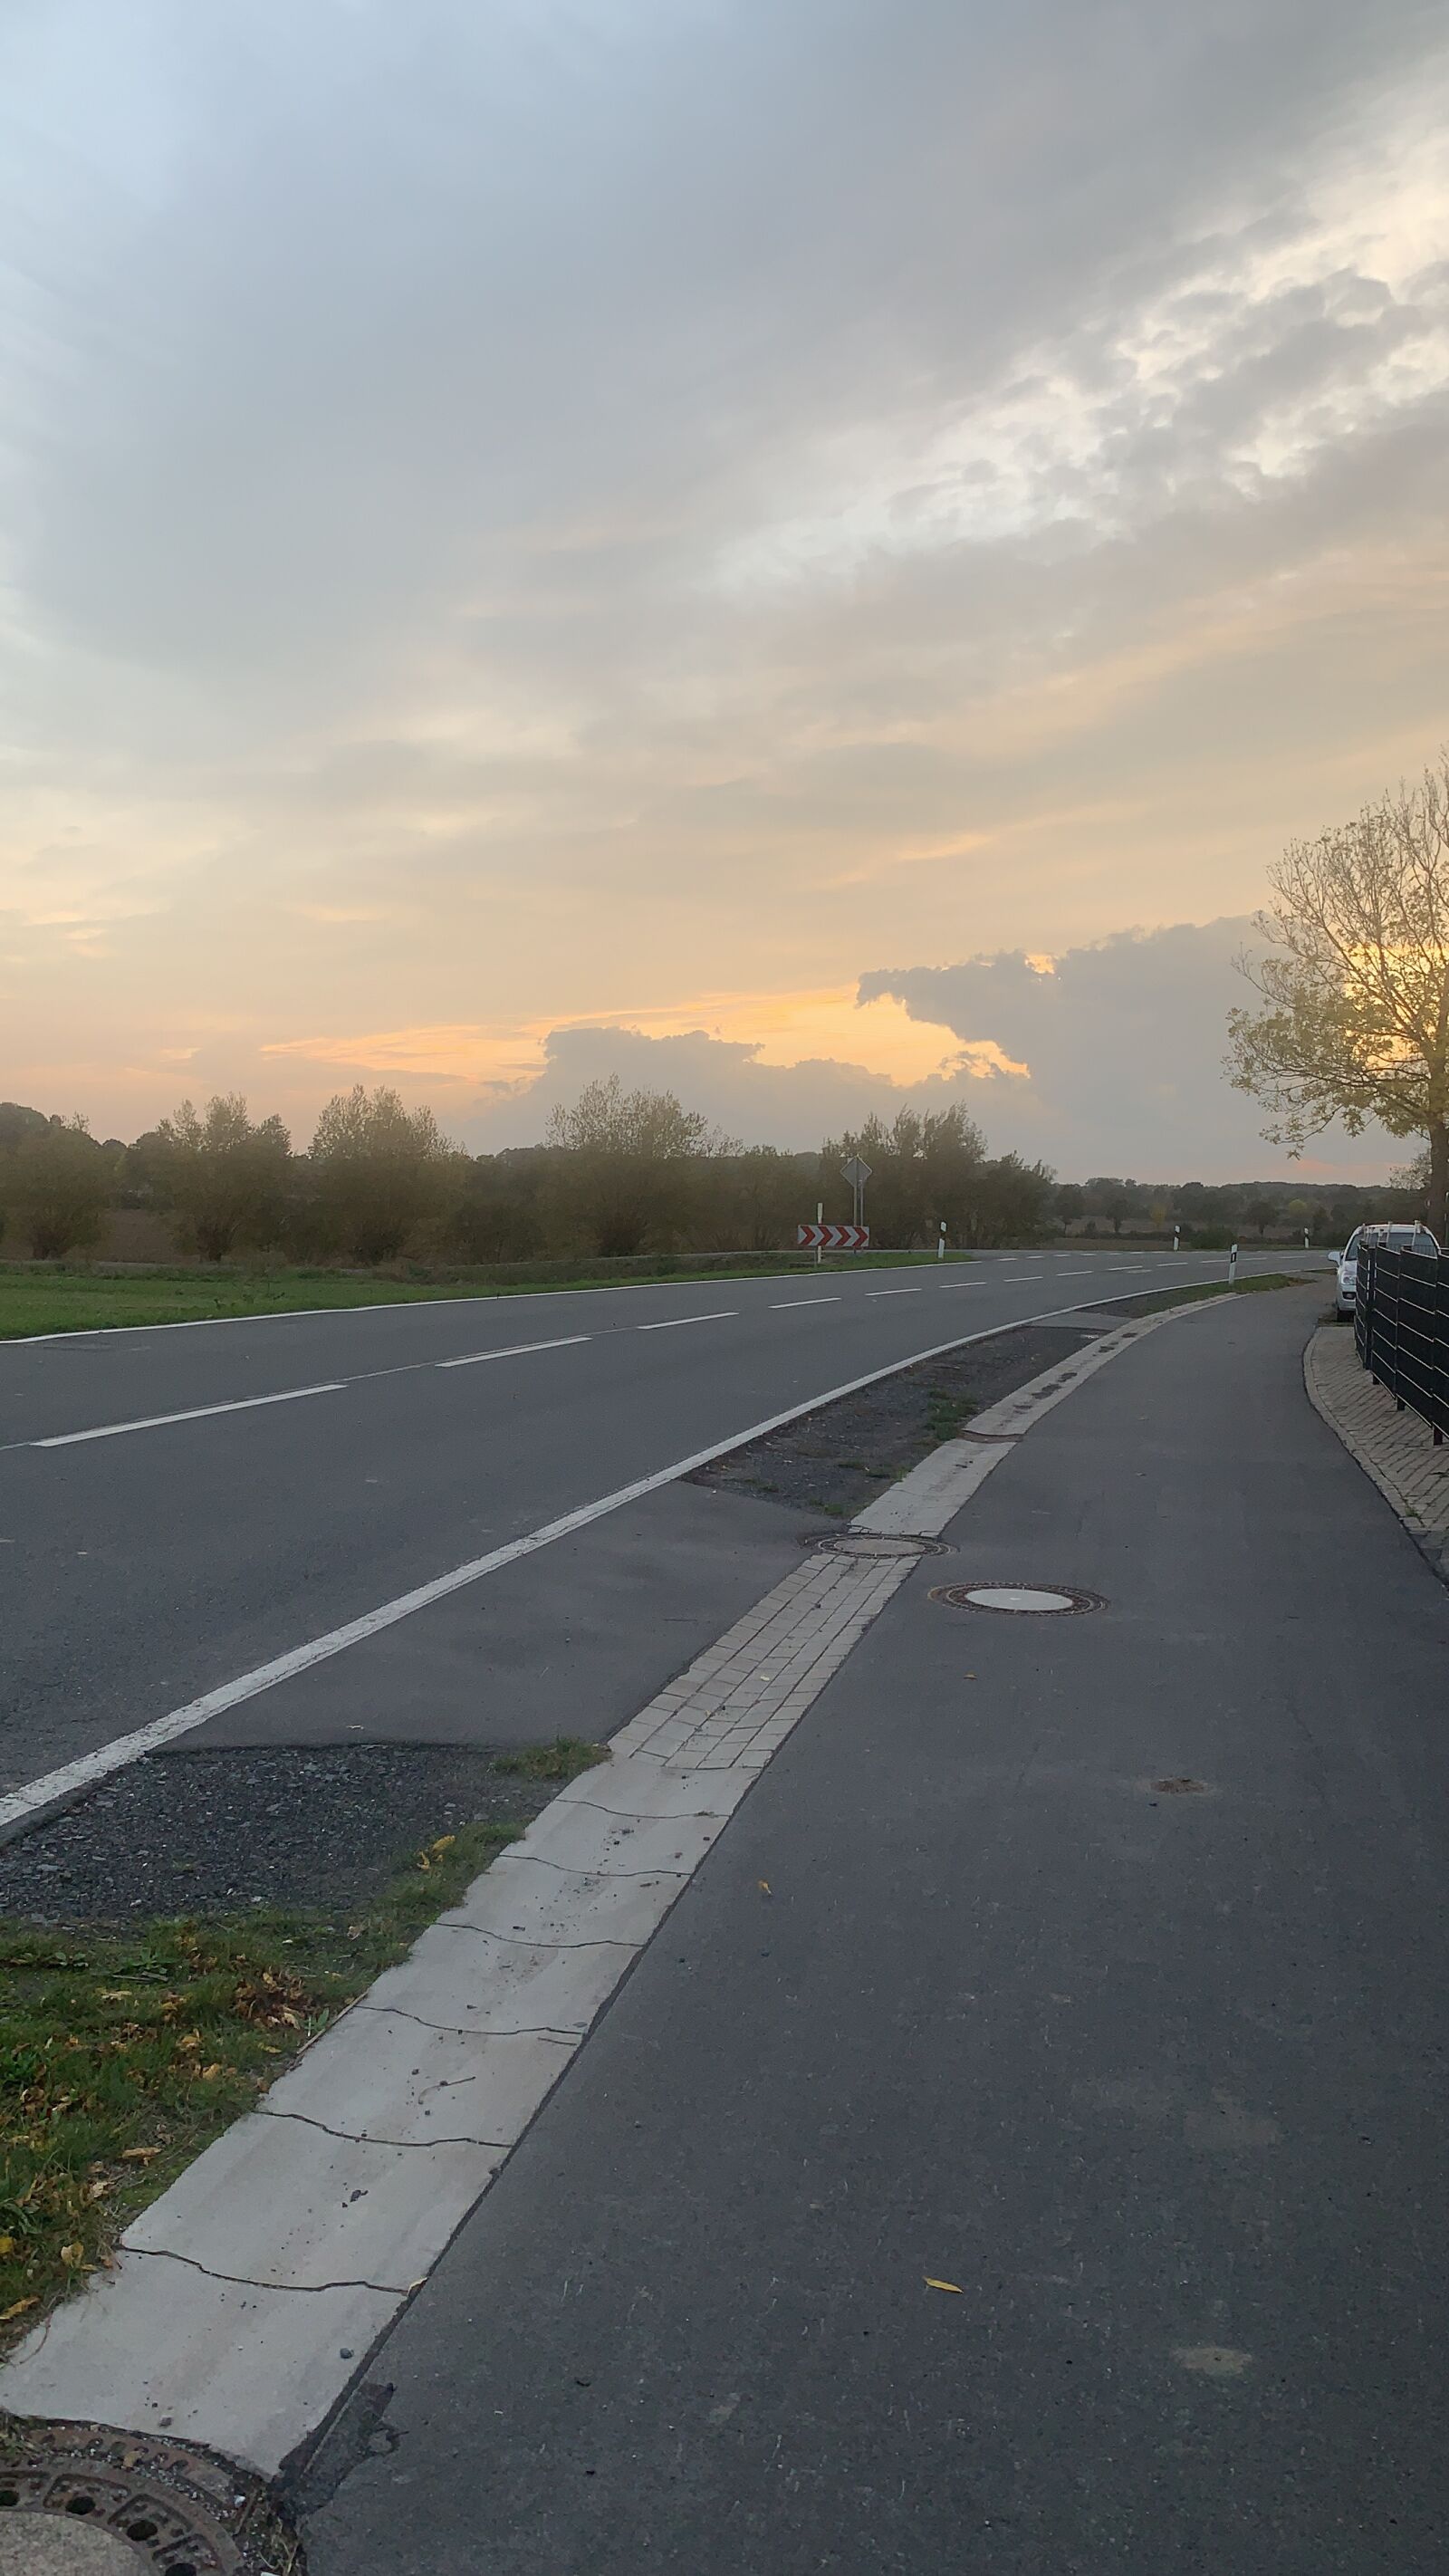 Apple iPhone XS Max + iPhone XS Max back camera 4.25mm f/1.8 sample photo. Road, cloud, trees photography